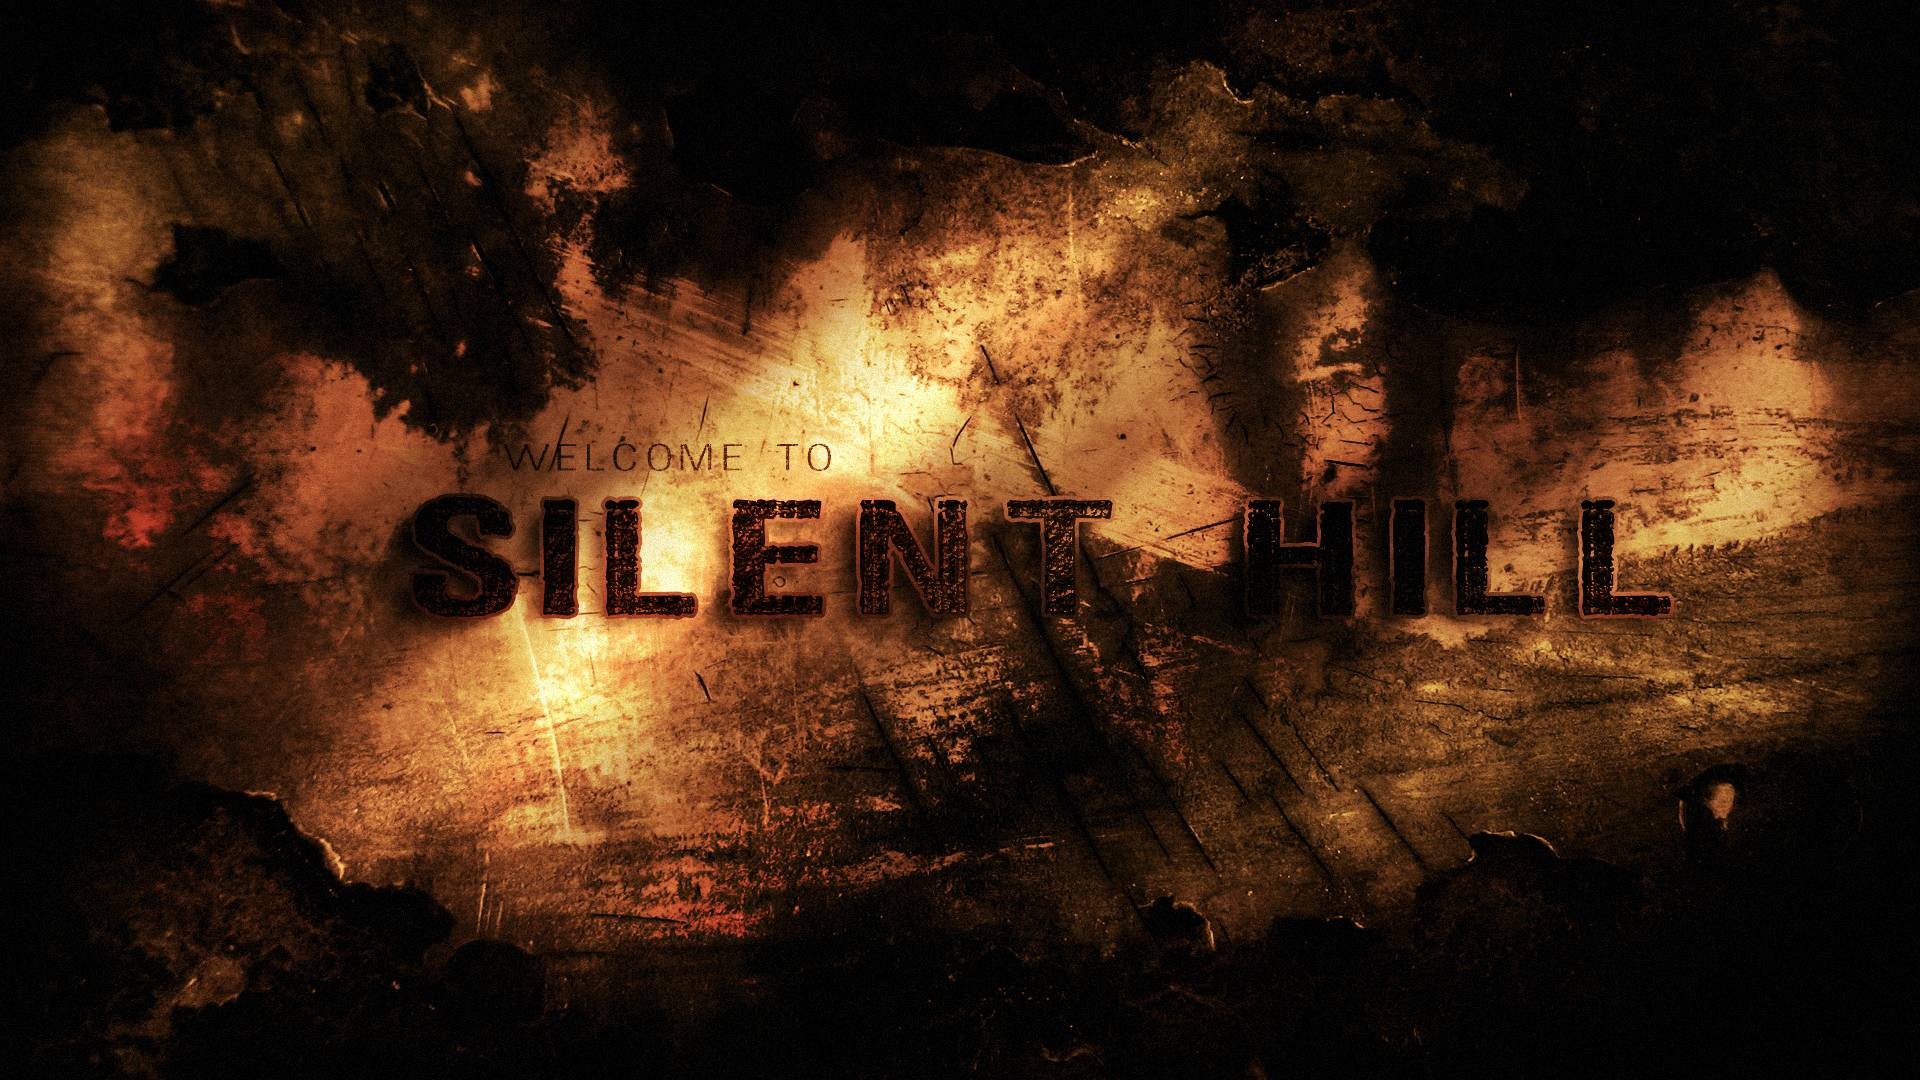 Three mysterious new Silent Hill games are in development